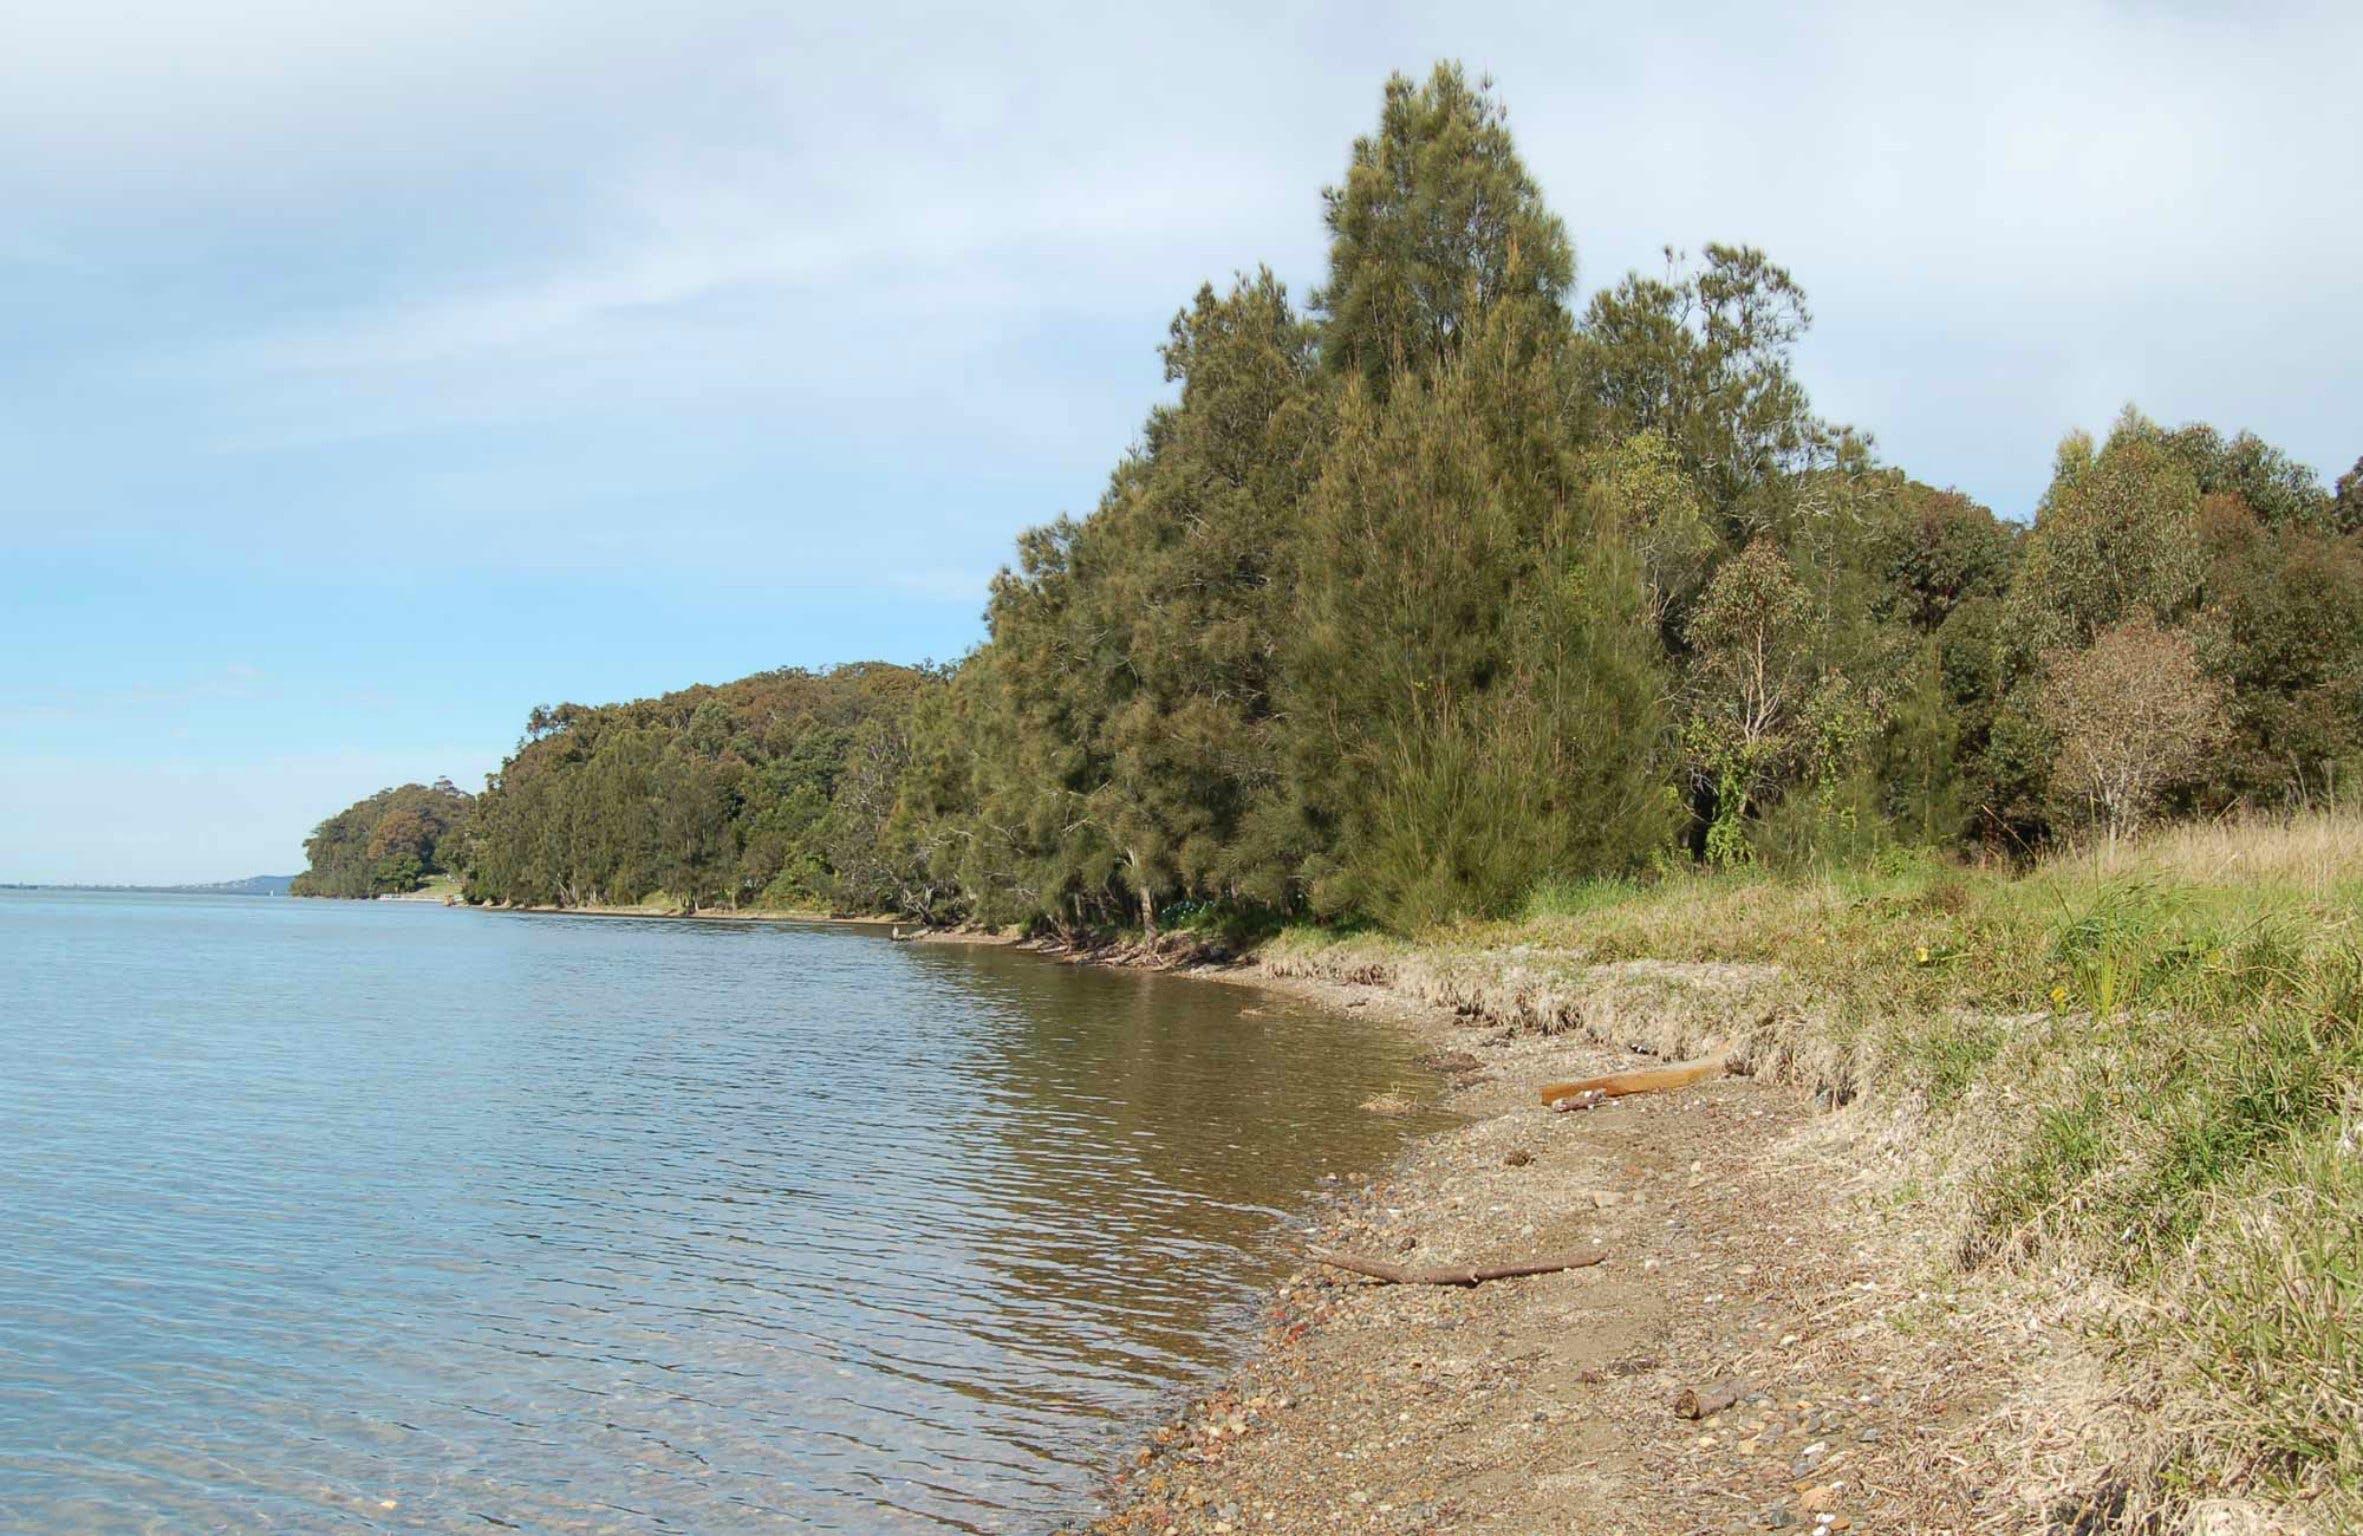 Lake Macquarie State Conservation Area - Attractions